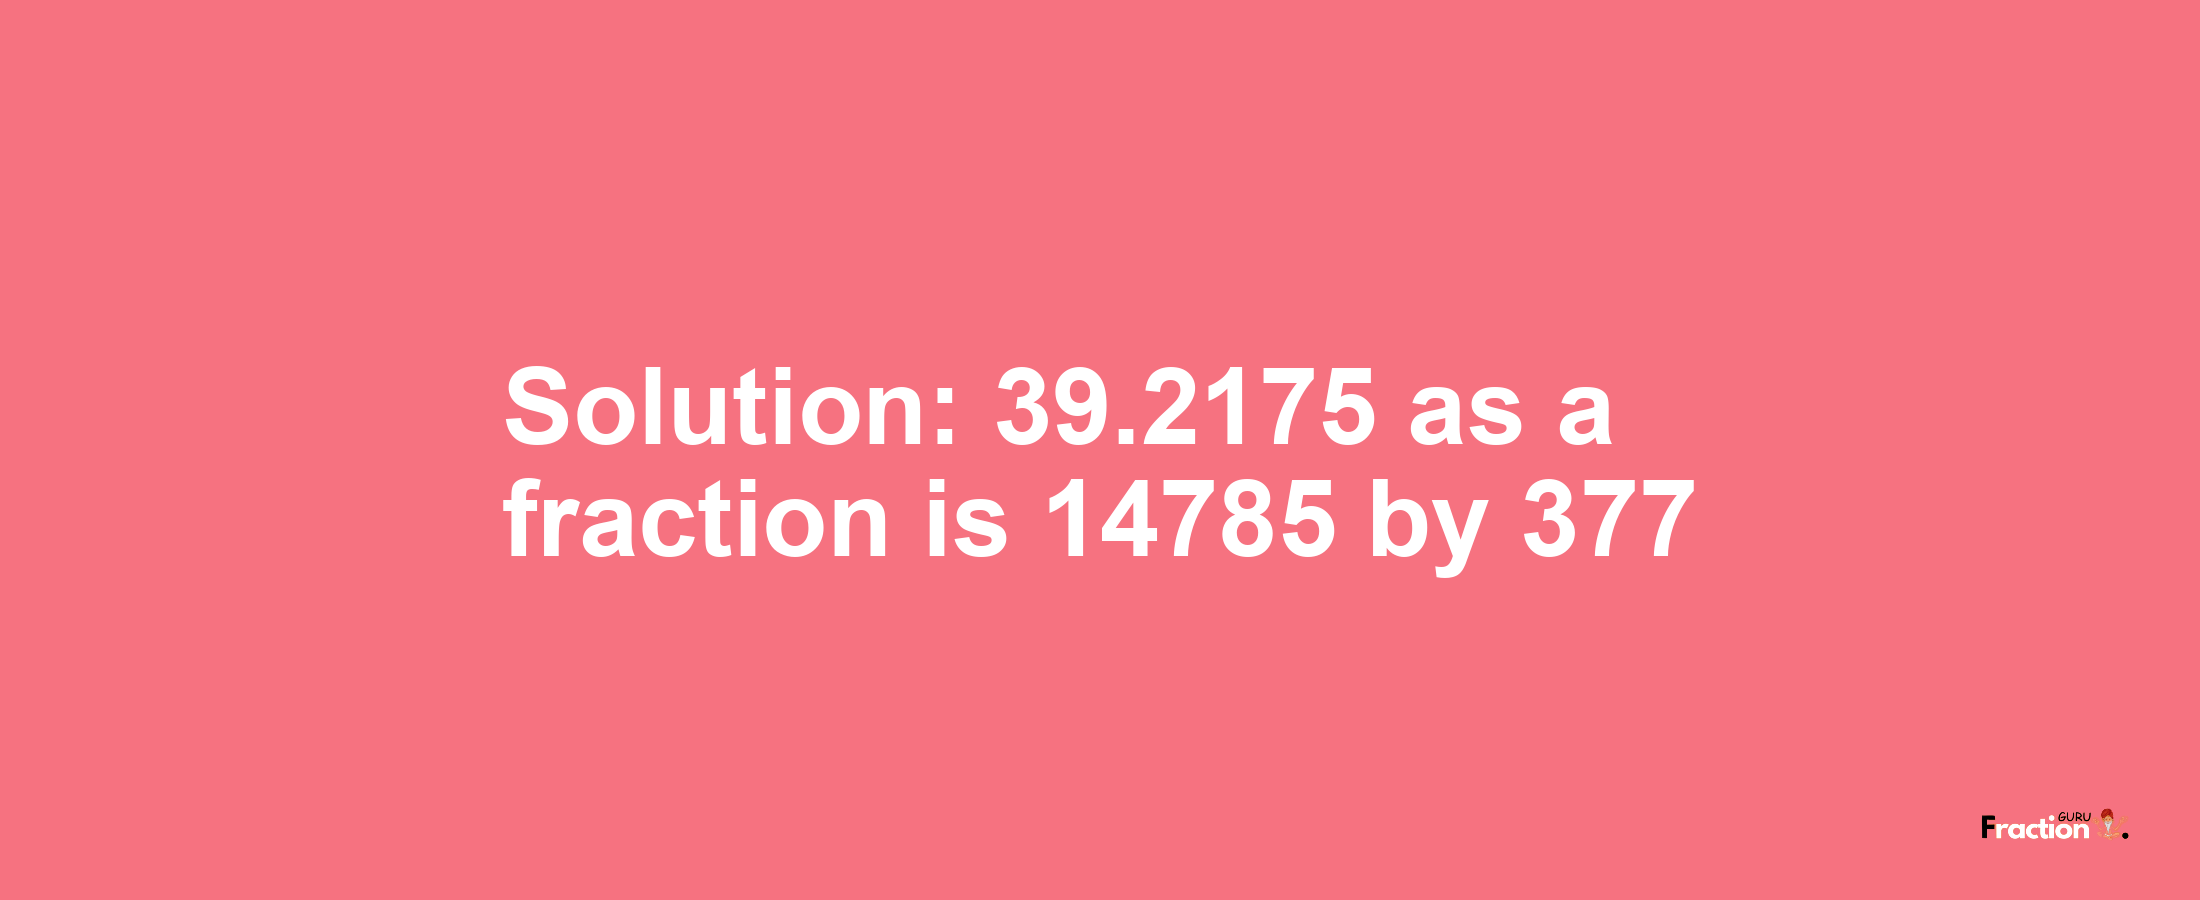 Solution:39.2175 as a fraction is 14785/377